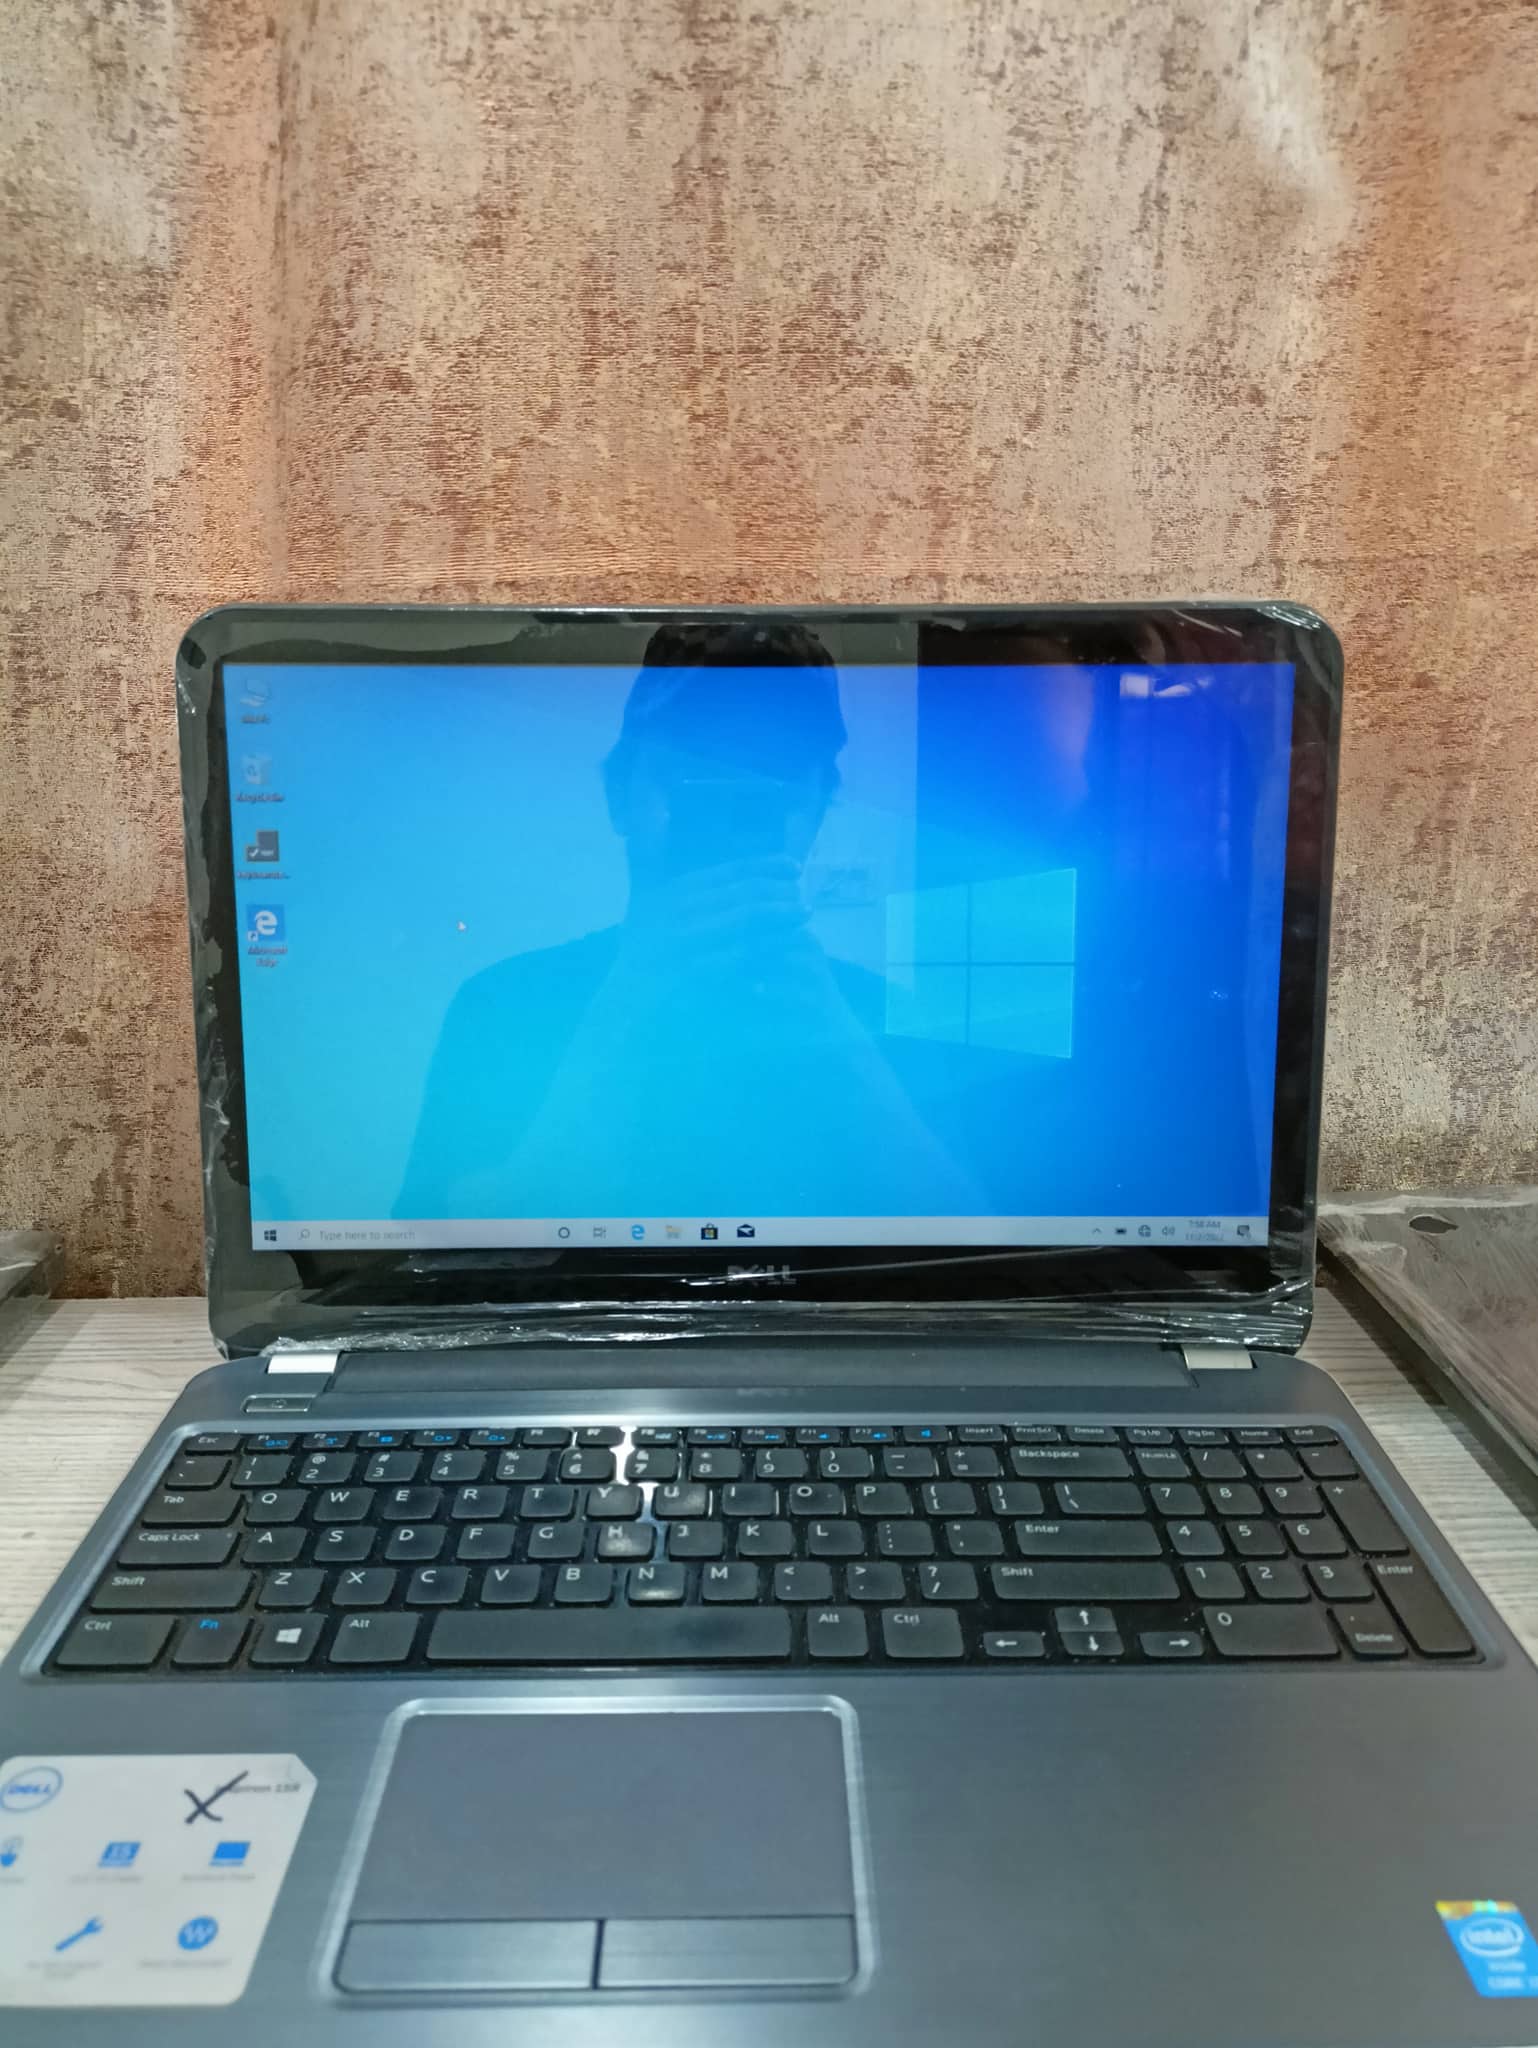 Dell Inspiron 5537 i7 4th Generation Touch Screen Glossy Body Numpaid Fast Awesome Laptop